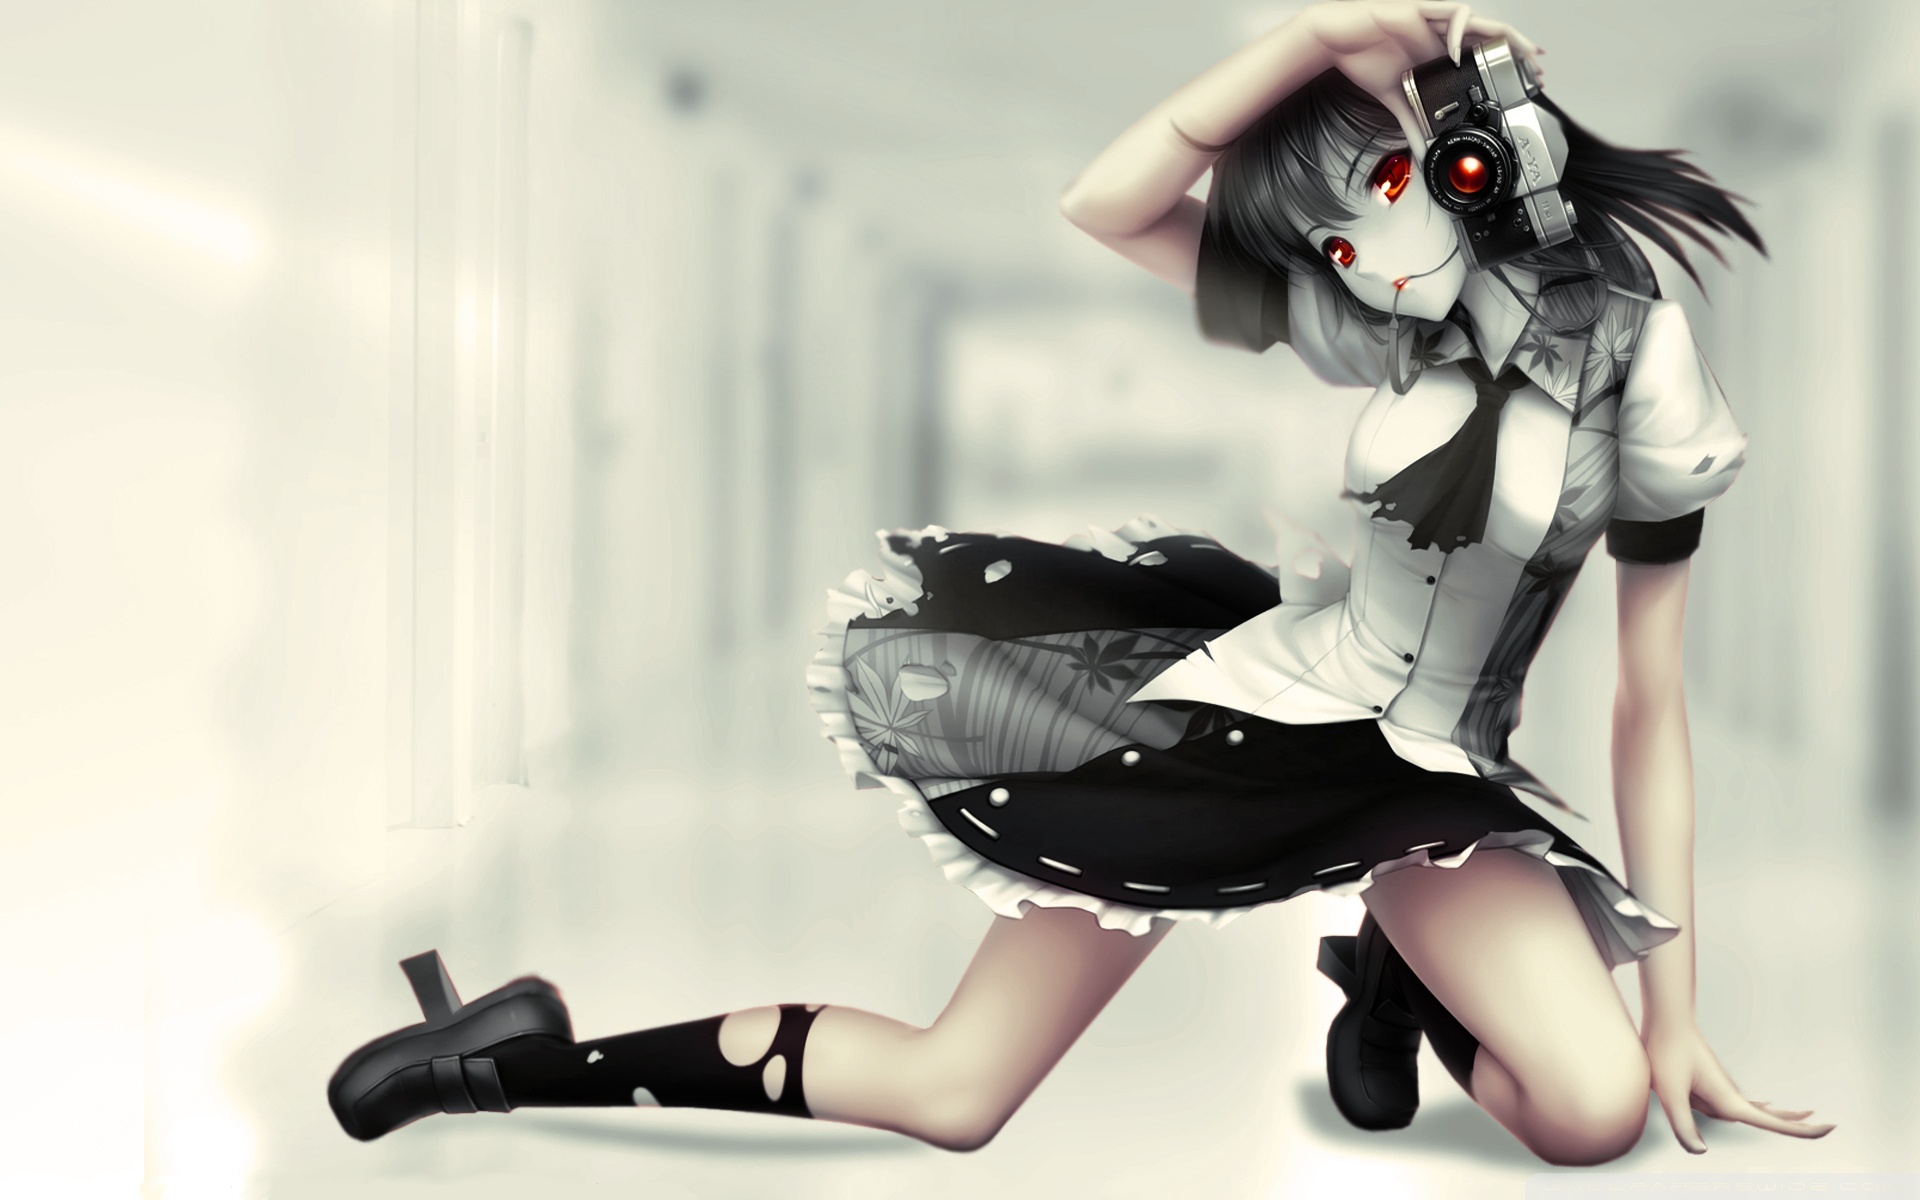 Anime Girl With Camera Ultra HD Desktop Background Wallpaper for